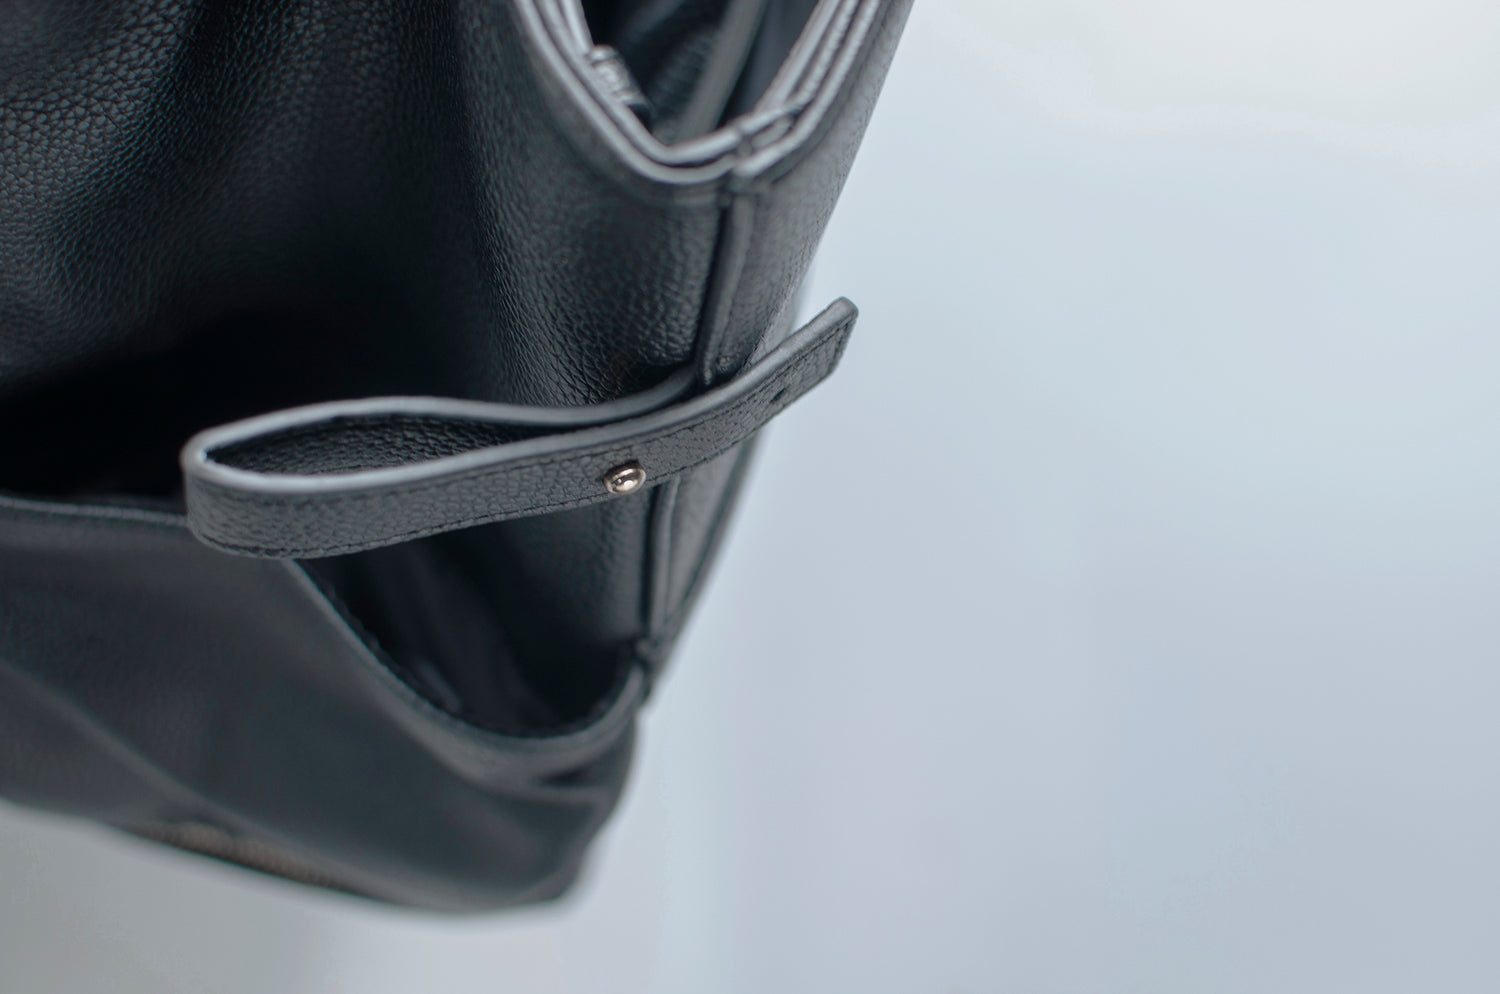 Detailed view of the elegant craftsmanship on an After Story leather handbag, emphasizing the polished hardware and fine leather grain.